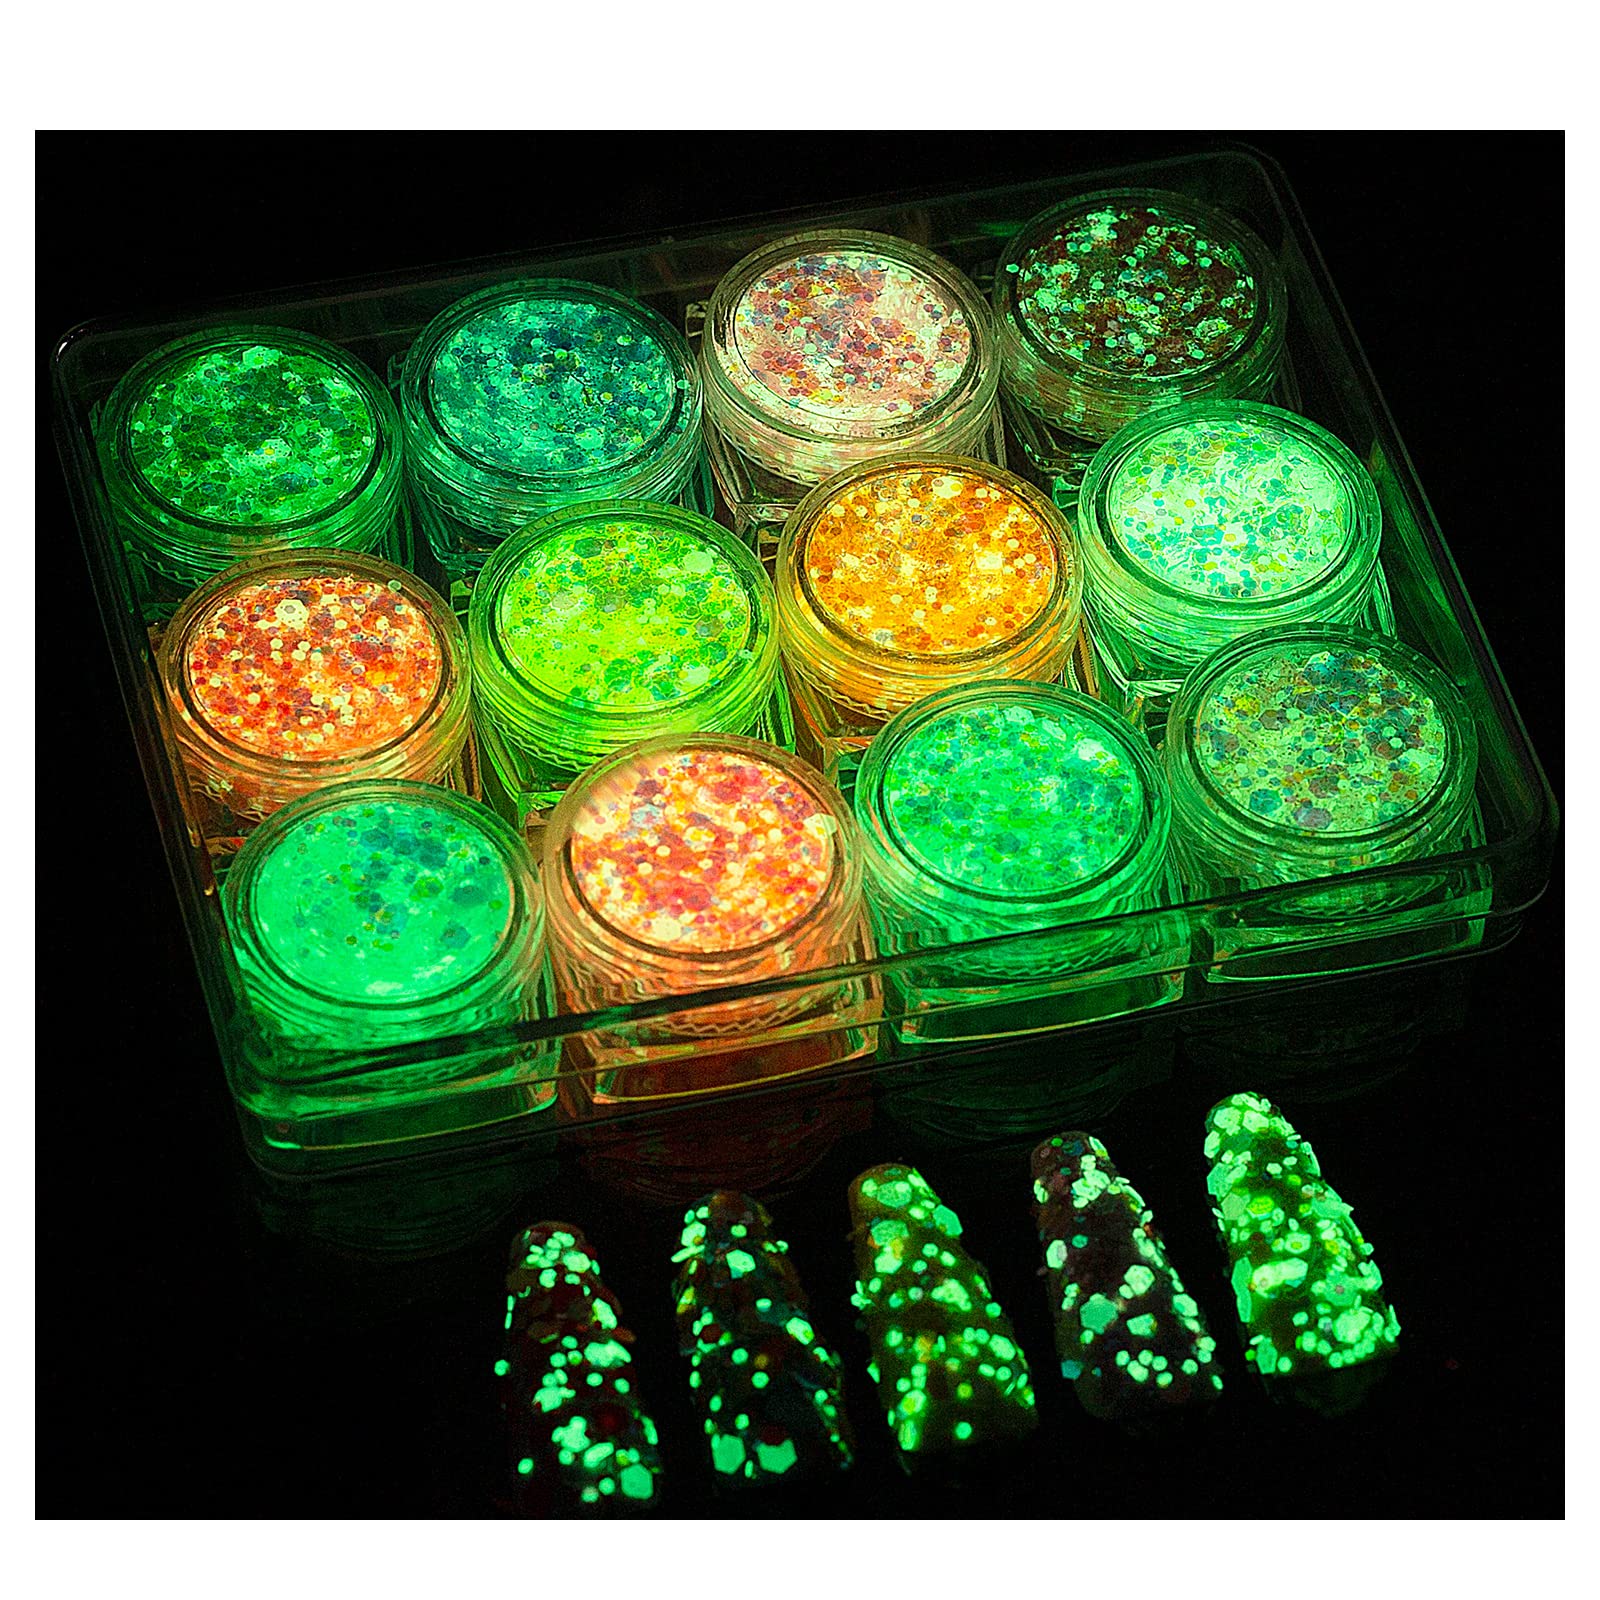 Chunky Glow in the Dark Glitter - Craft Adhesive Products